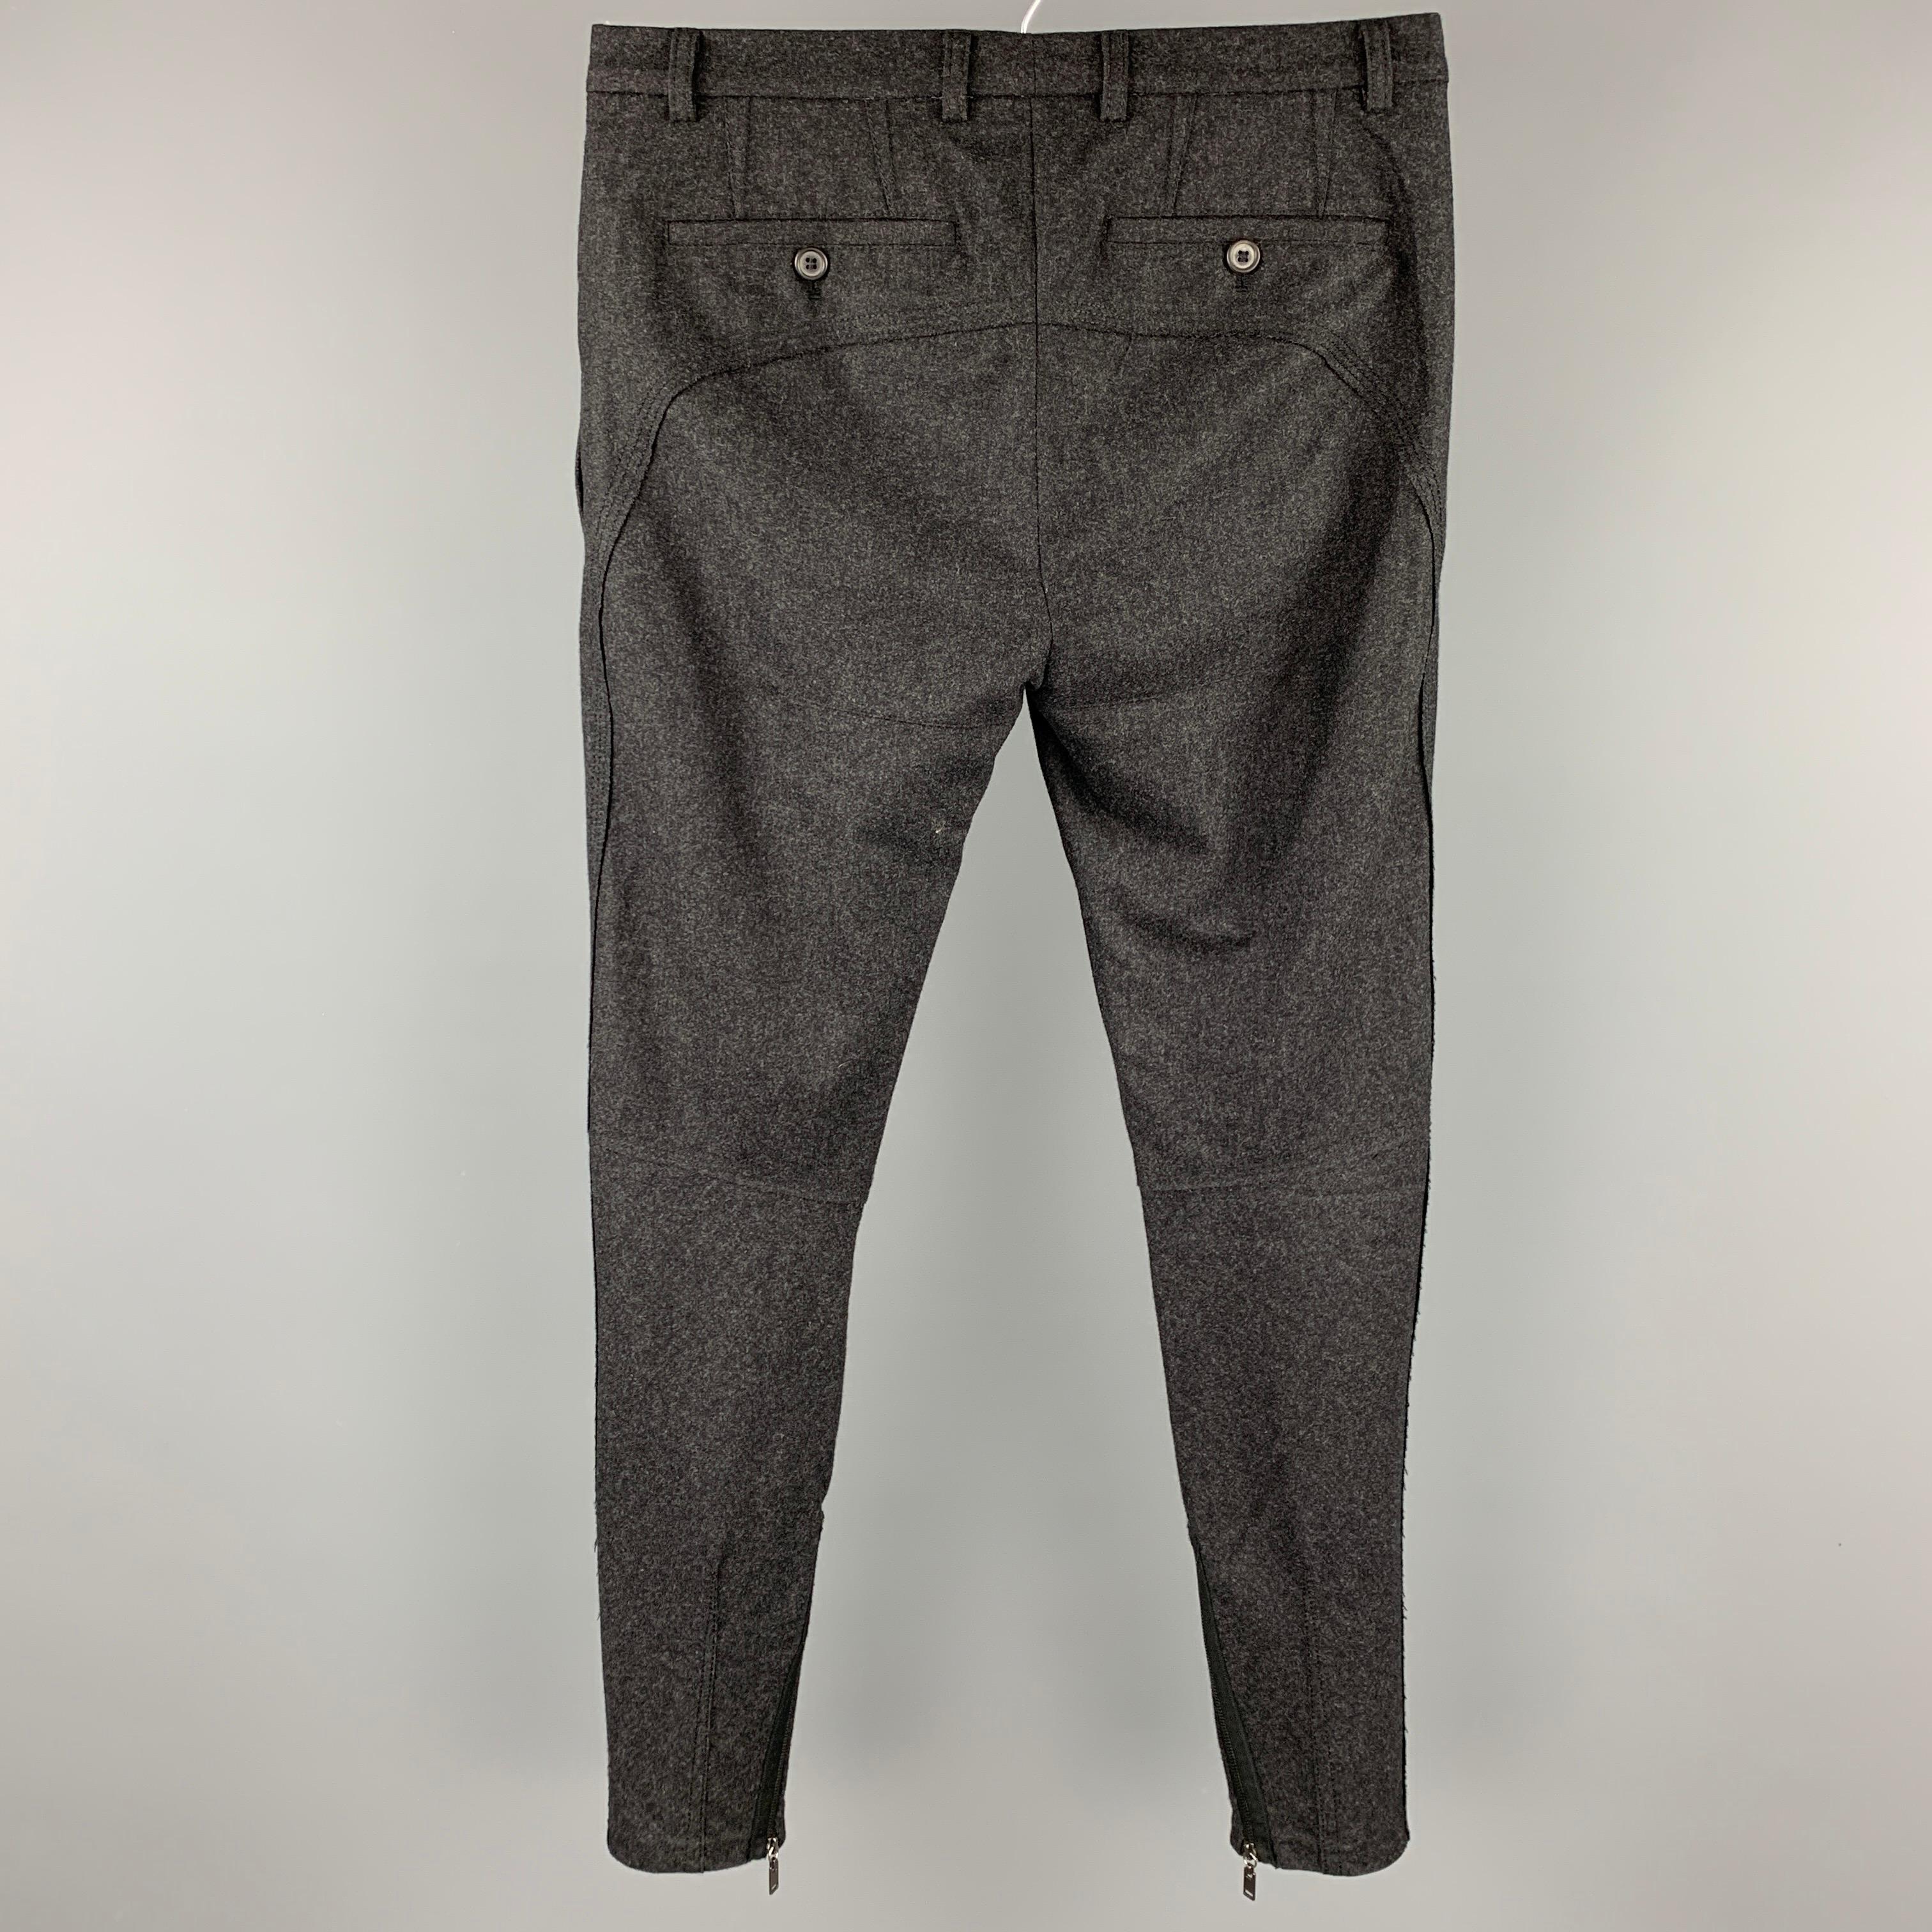 LANVIN dress pants comes in a charcoal heather sable featuring a narrow leg, zipper ankle details, and a zip fly closure. Made in Romania.

Very Good Pre-Owned Condition.
Marked: Size not visible

Measurements:

Waist: 30 in.
Rise: 10 in.
Inseam: 29